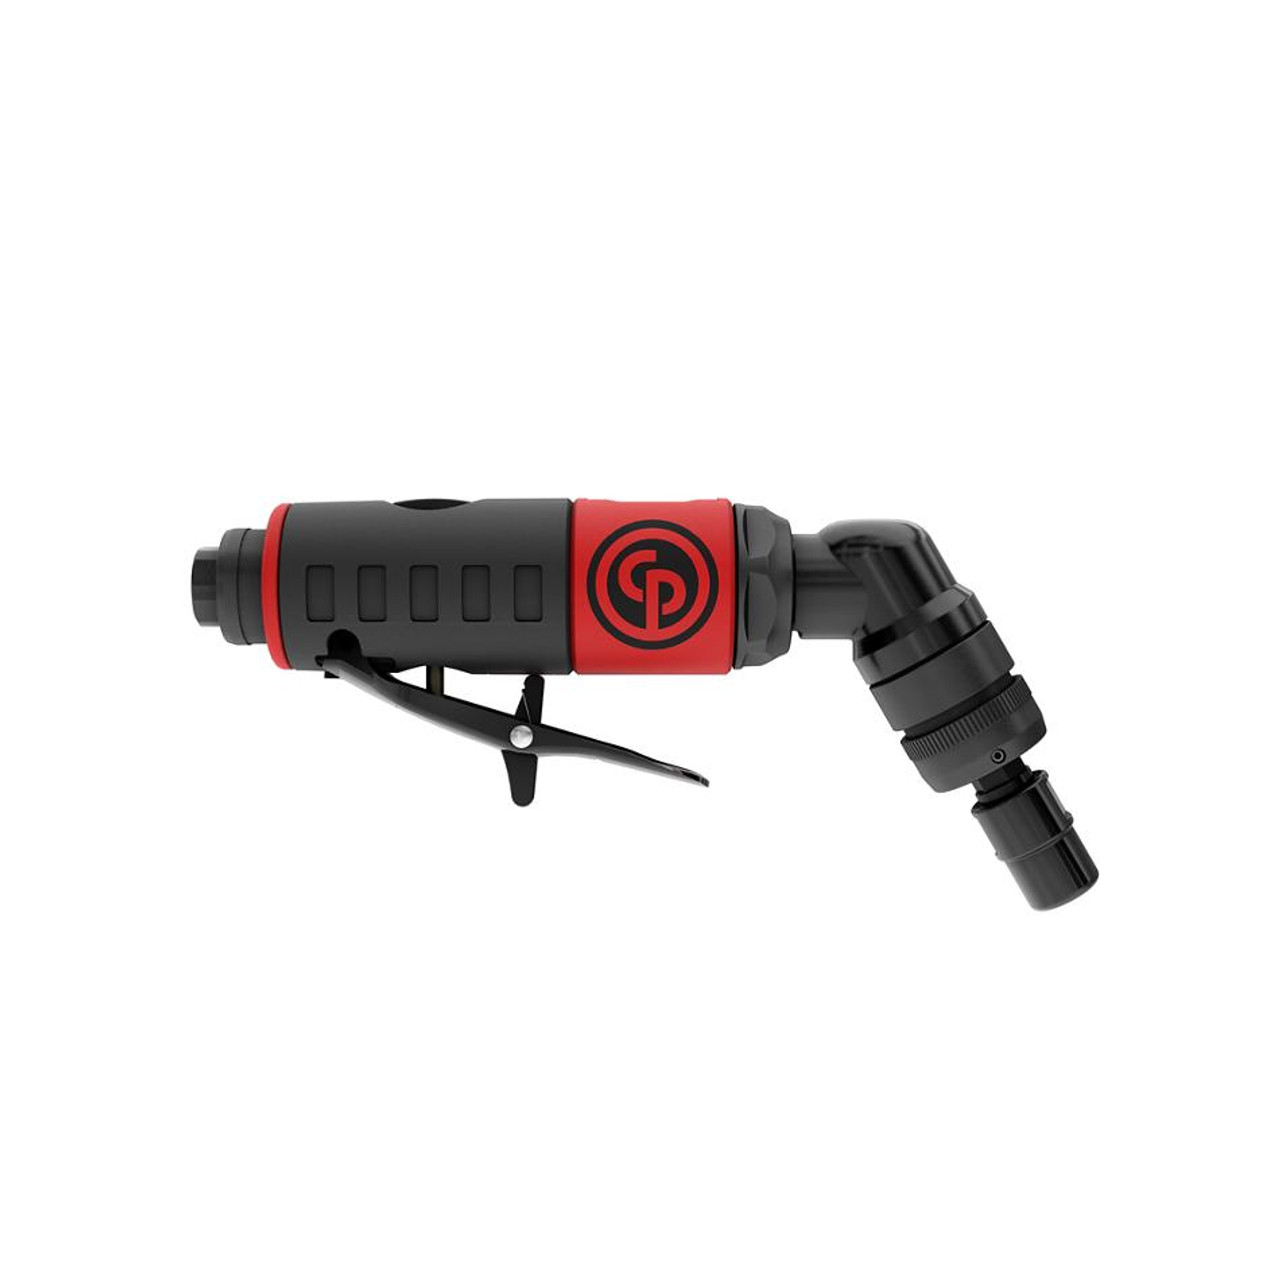 Chicago Pneumatic 120 degree Angle Die Grinder, 1/4" / 6mm collet capacity, 23000 rpm, 250W (CP7408)